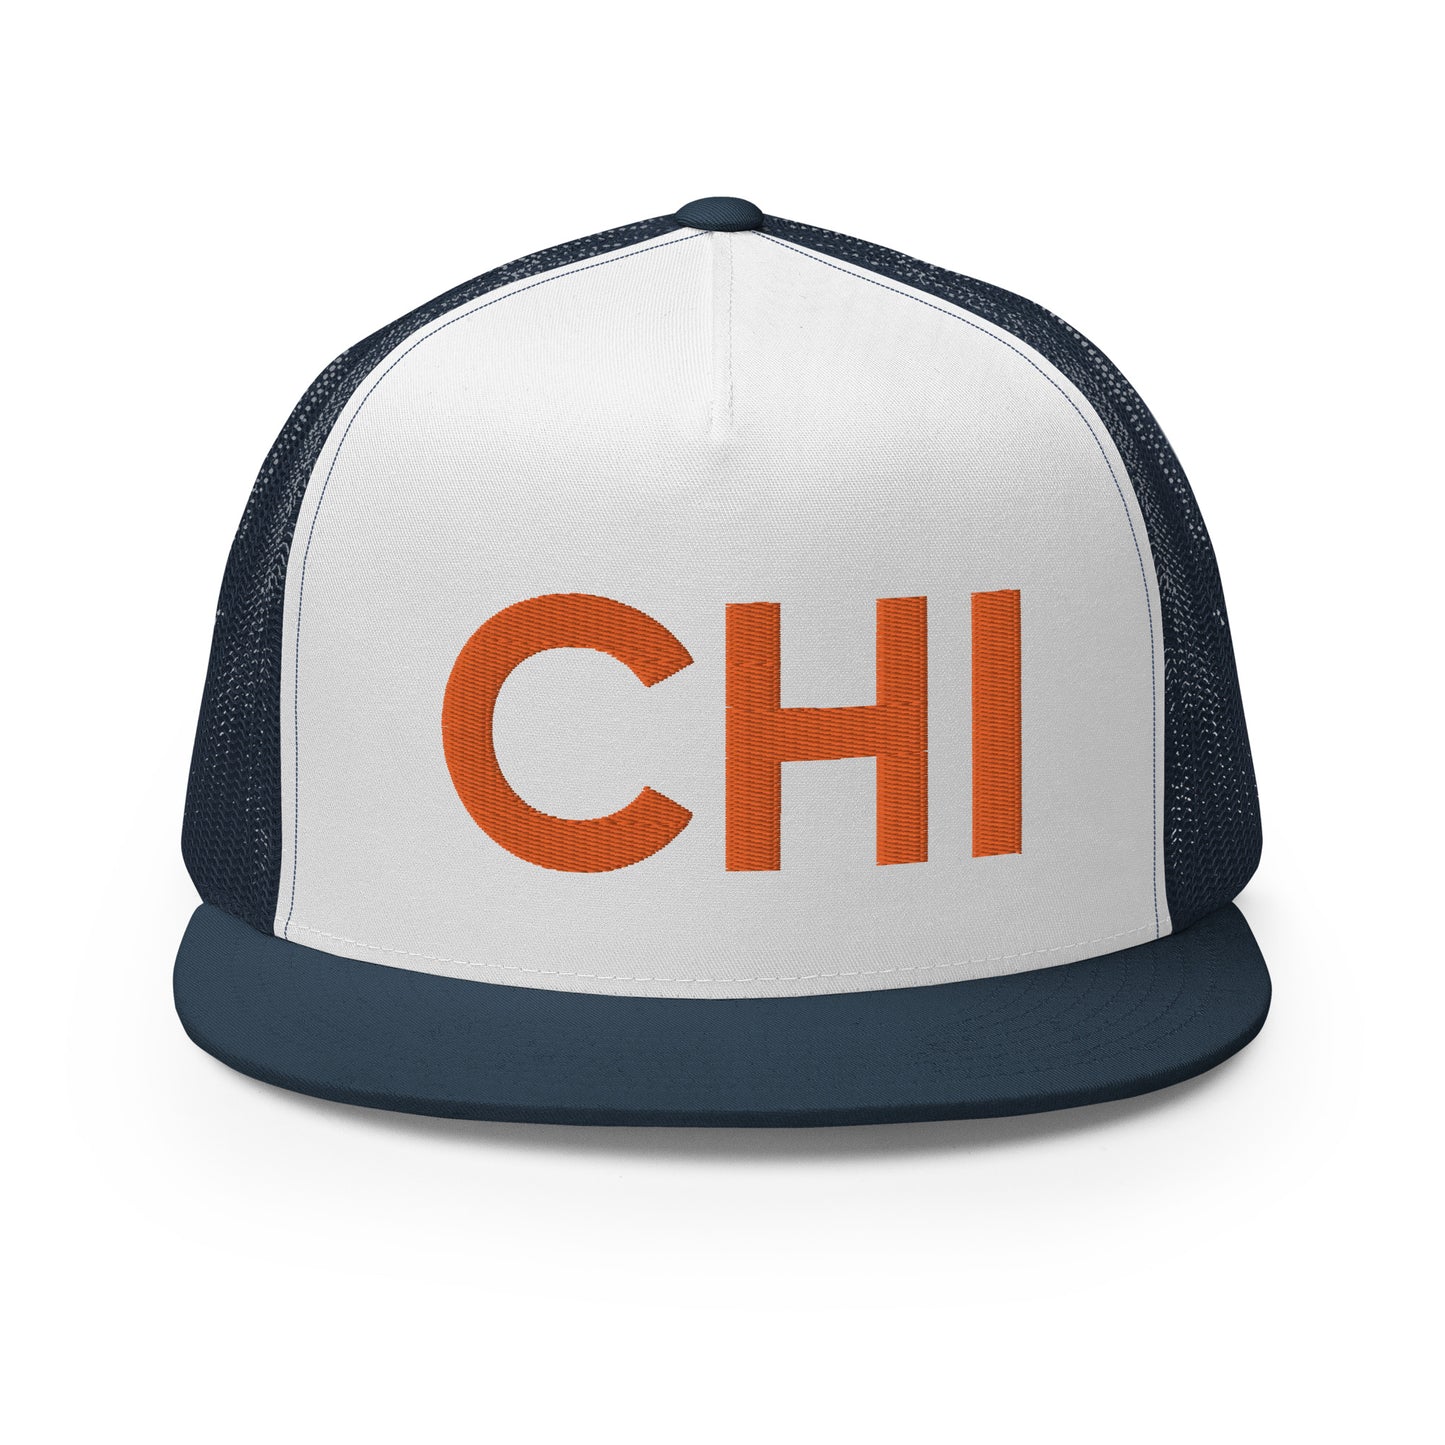 CHI Chicago Strong Trucker Hat